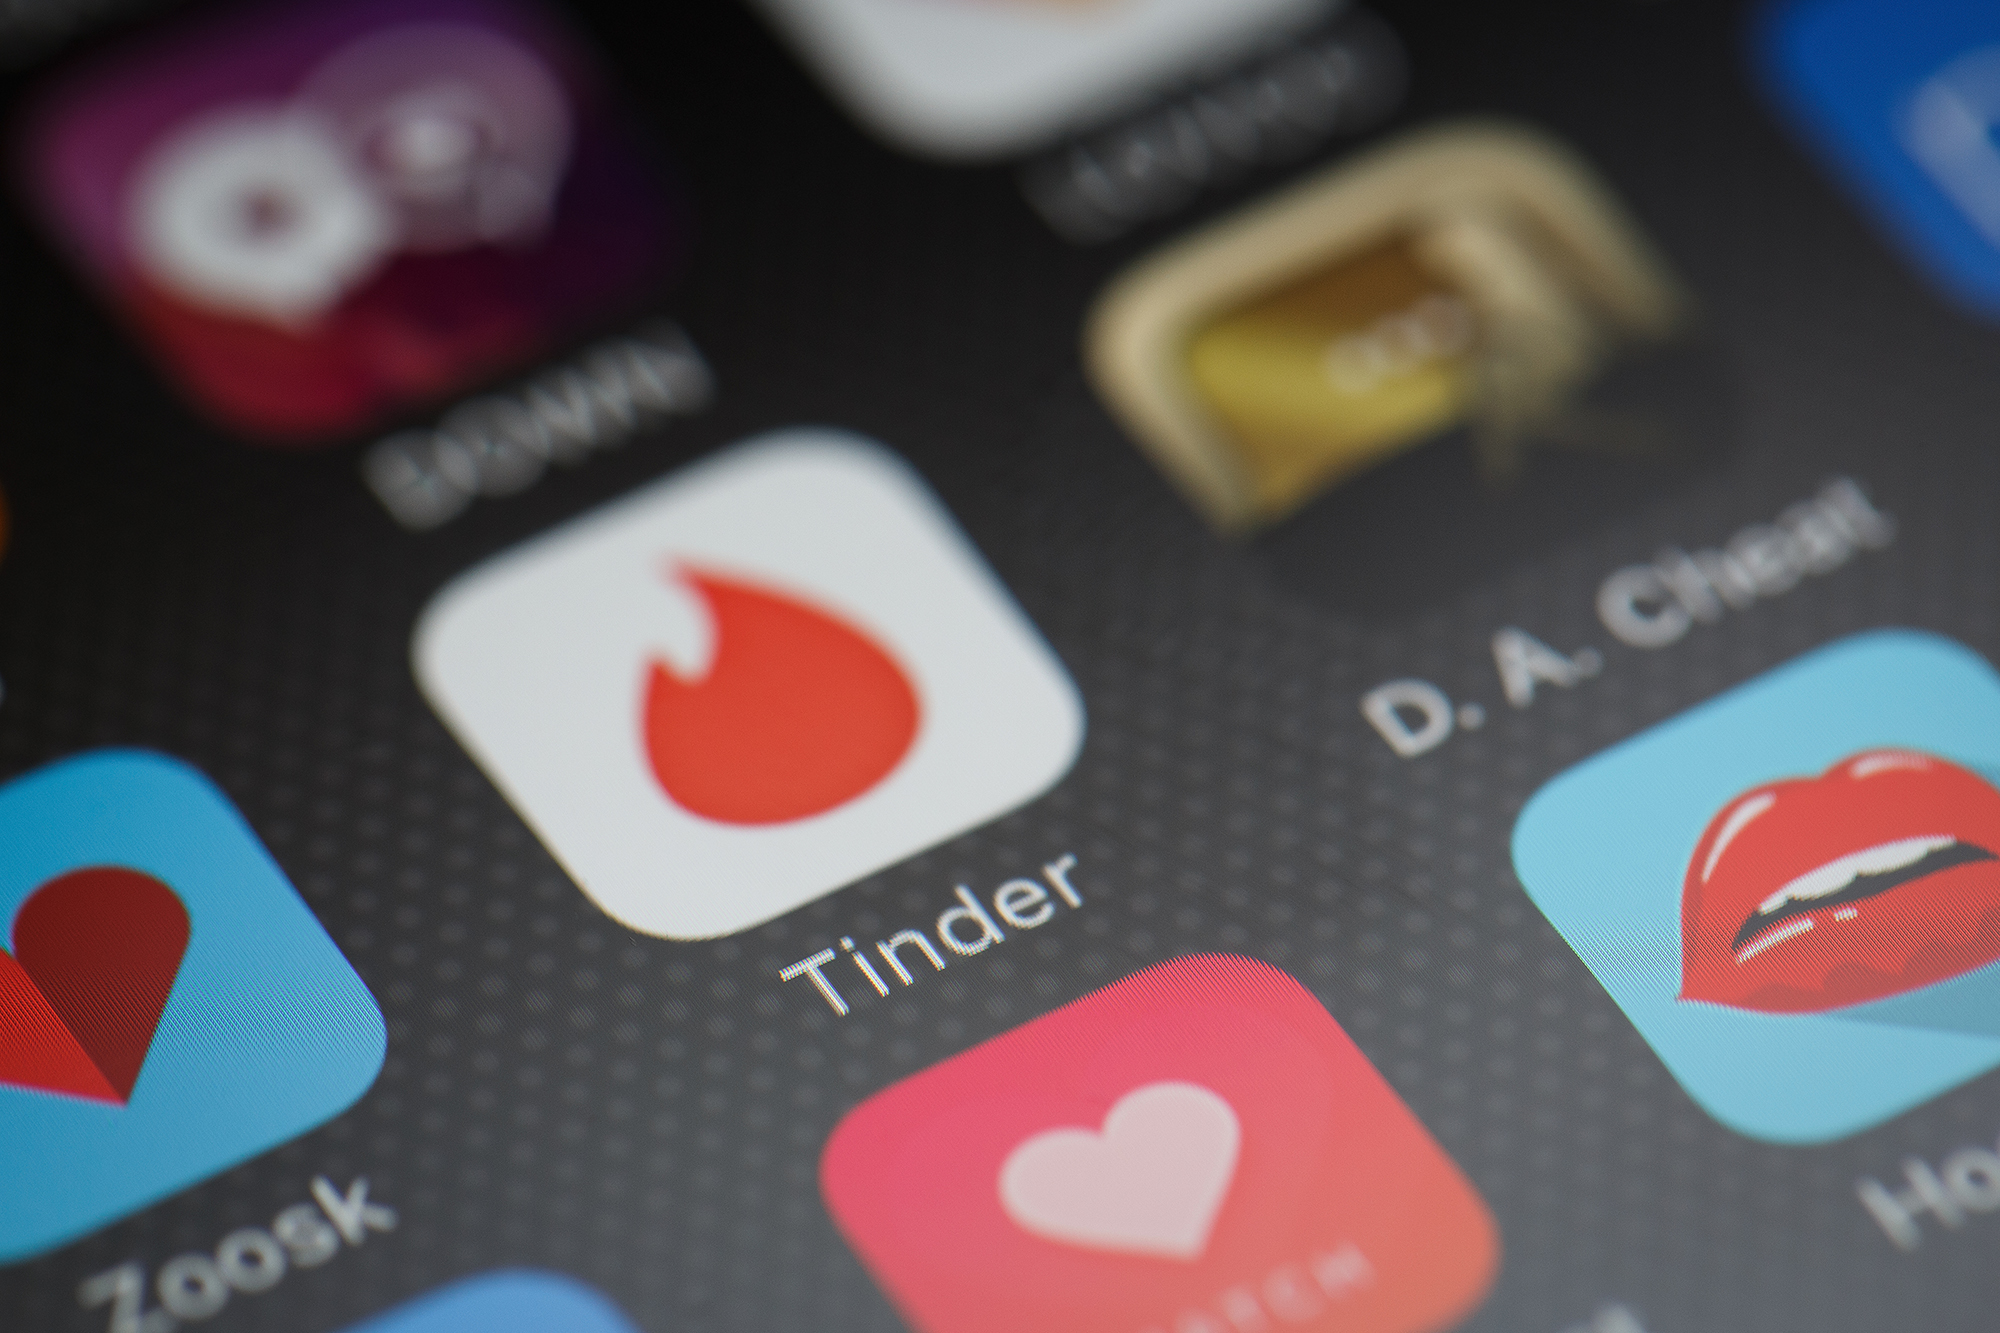 Serial Killer Conviction Prompts Police To Warn Of Dating App Dangers